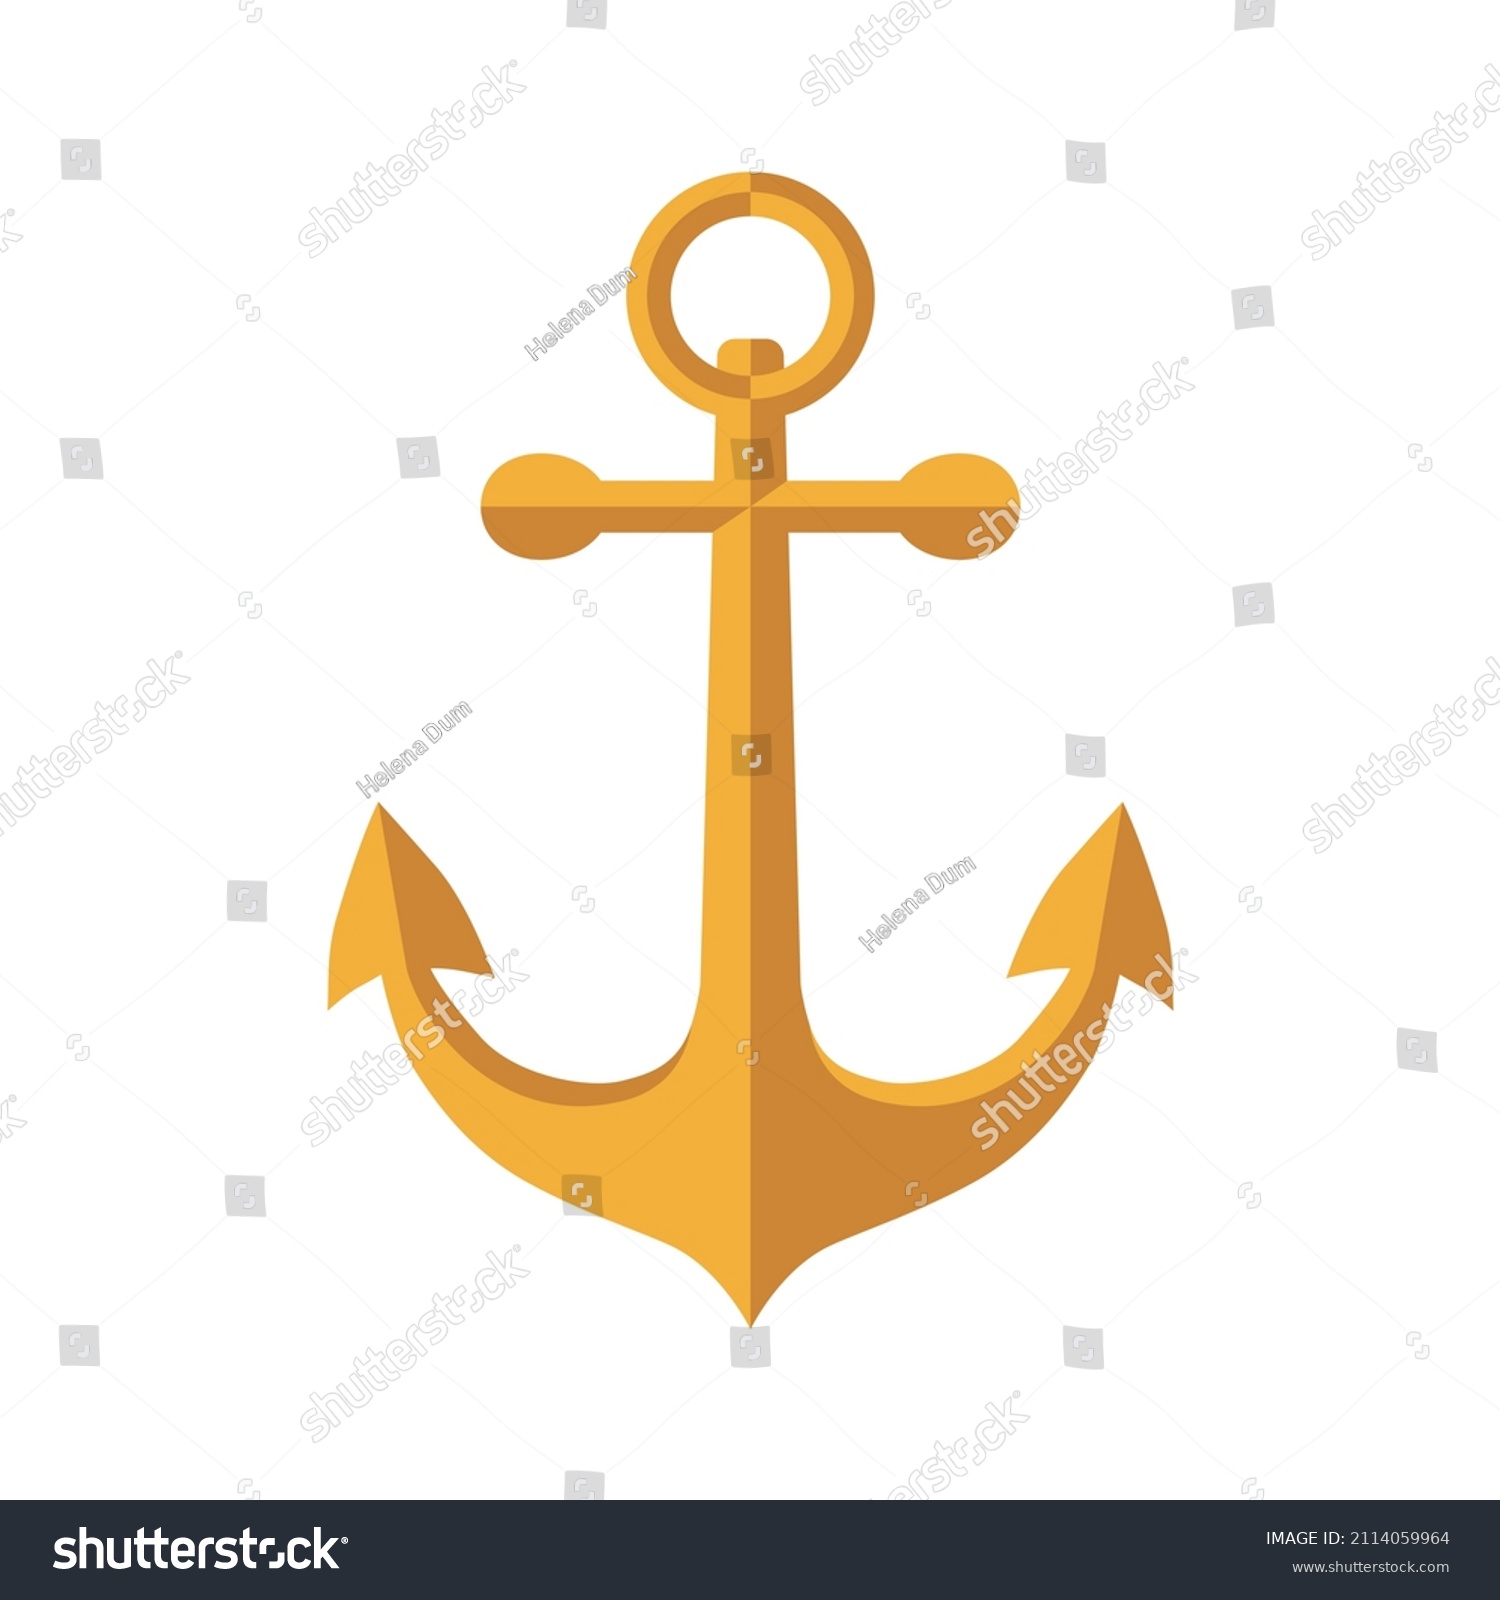 SVG of The golden anchor. Marine theme. The oldest symbol of hope.  Vector illustration isolated on a white background for design and web. svg